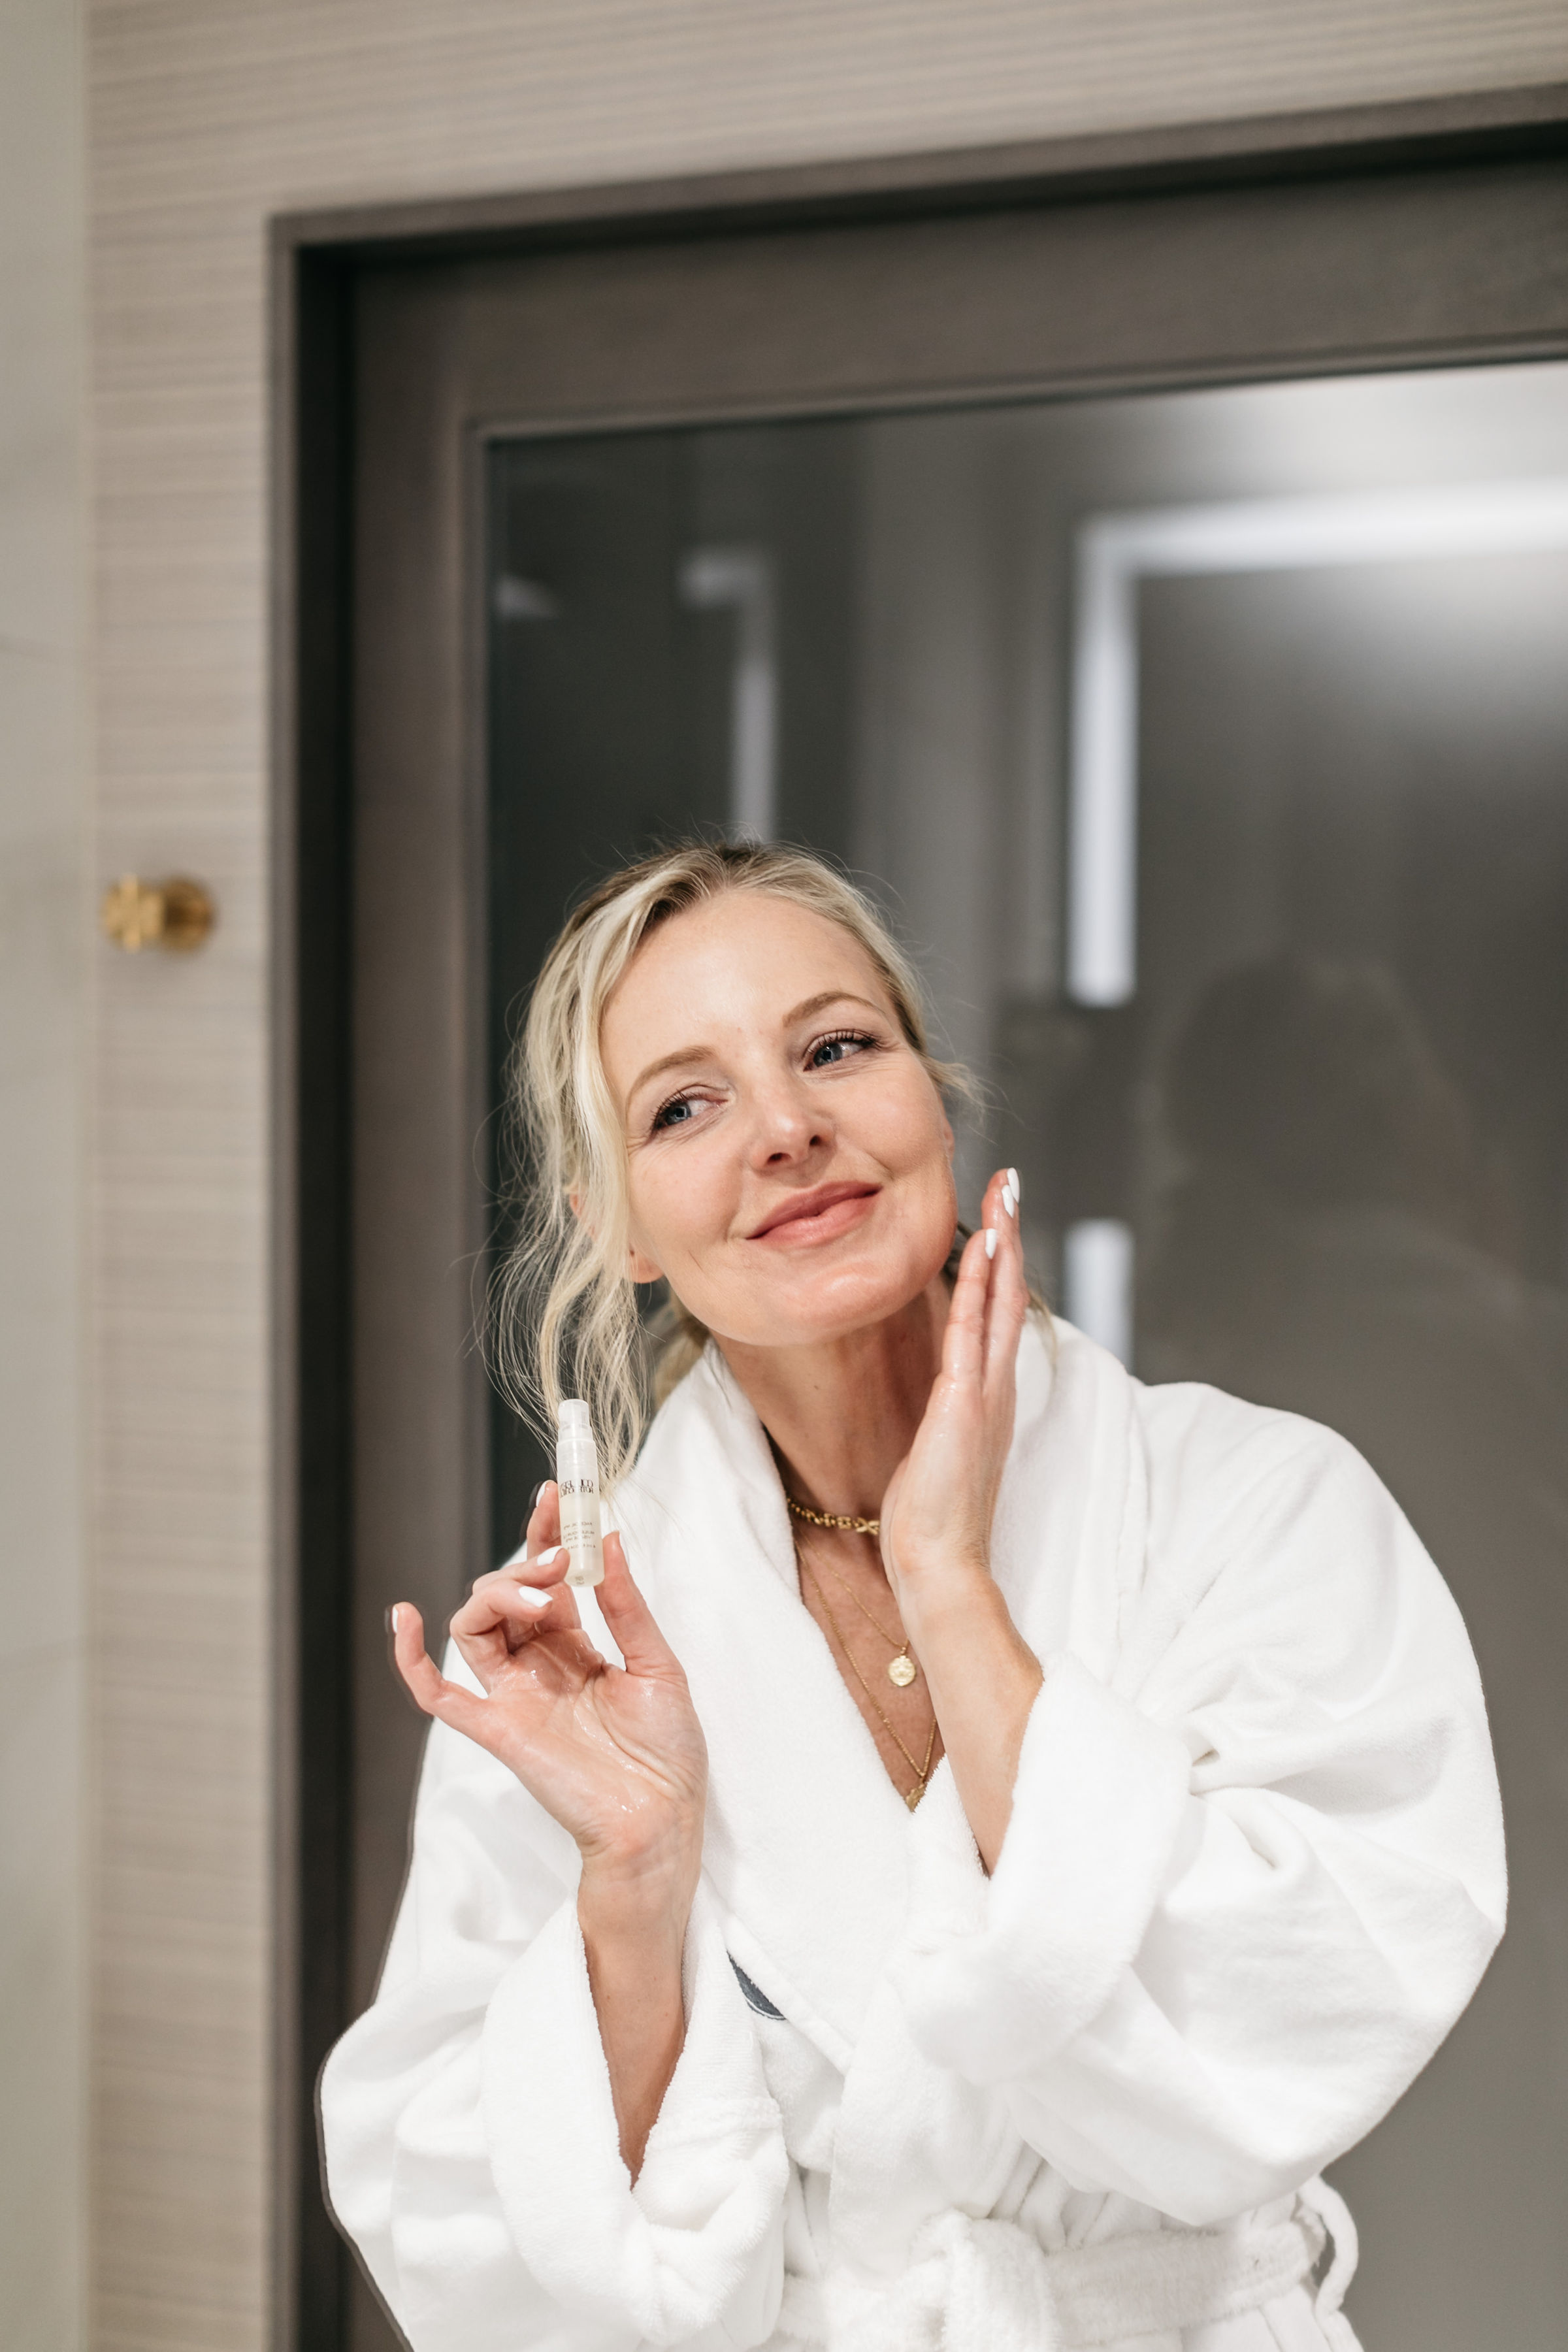 Anti-Aging Skincare, Fashion blogger over 40, Erin Busbee of BusbeeStyle.com featuring the Colleen Rothschild Discovery Collection skincare kit including the face oil